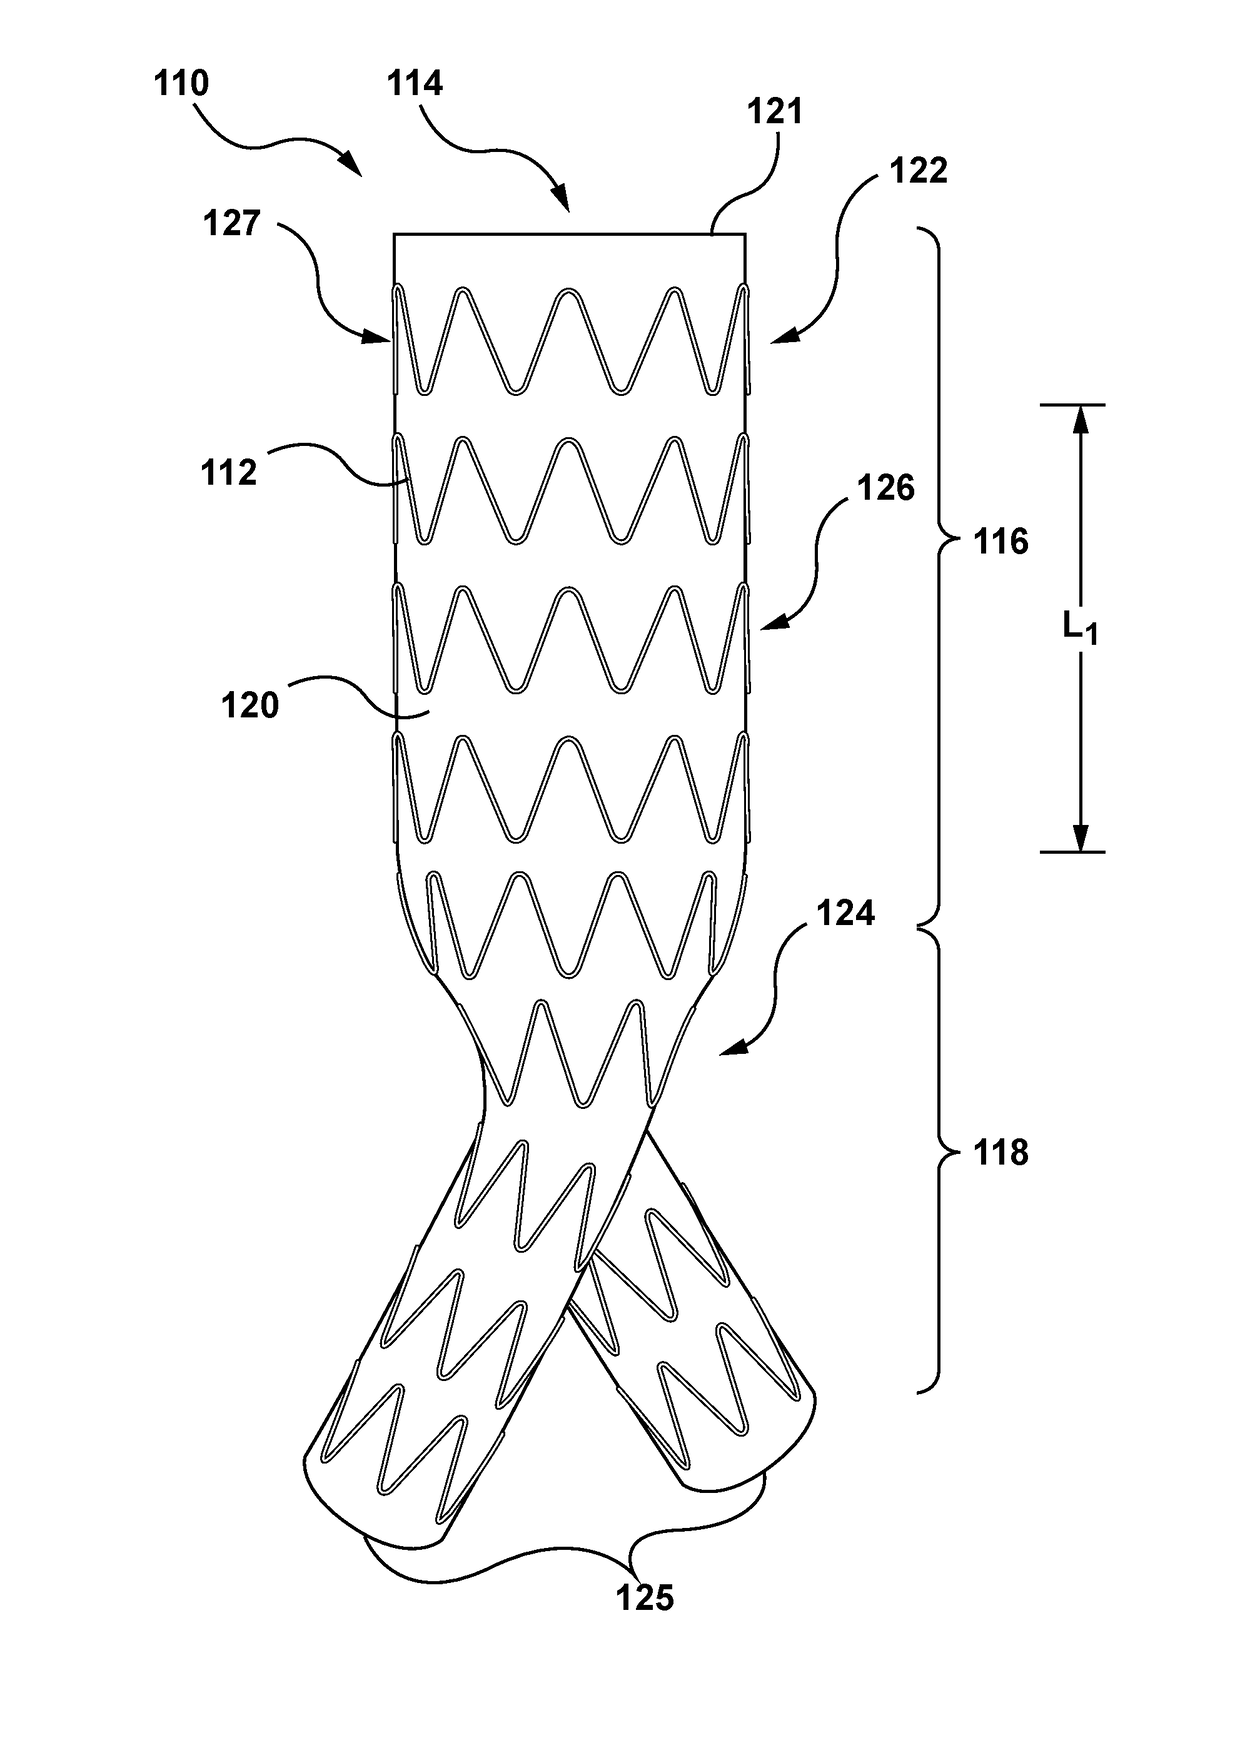 Endoluminal prosthetic assemblies, and associated systems and methods for percutaneous repair of a vascular tissue defect